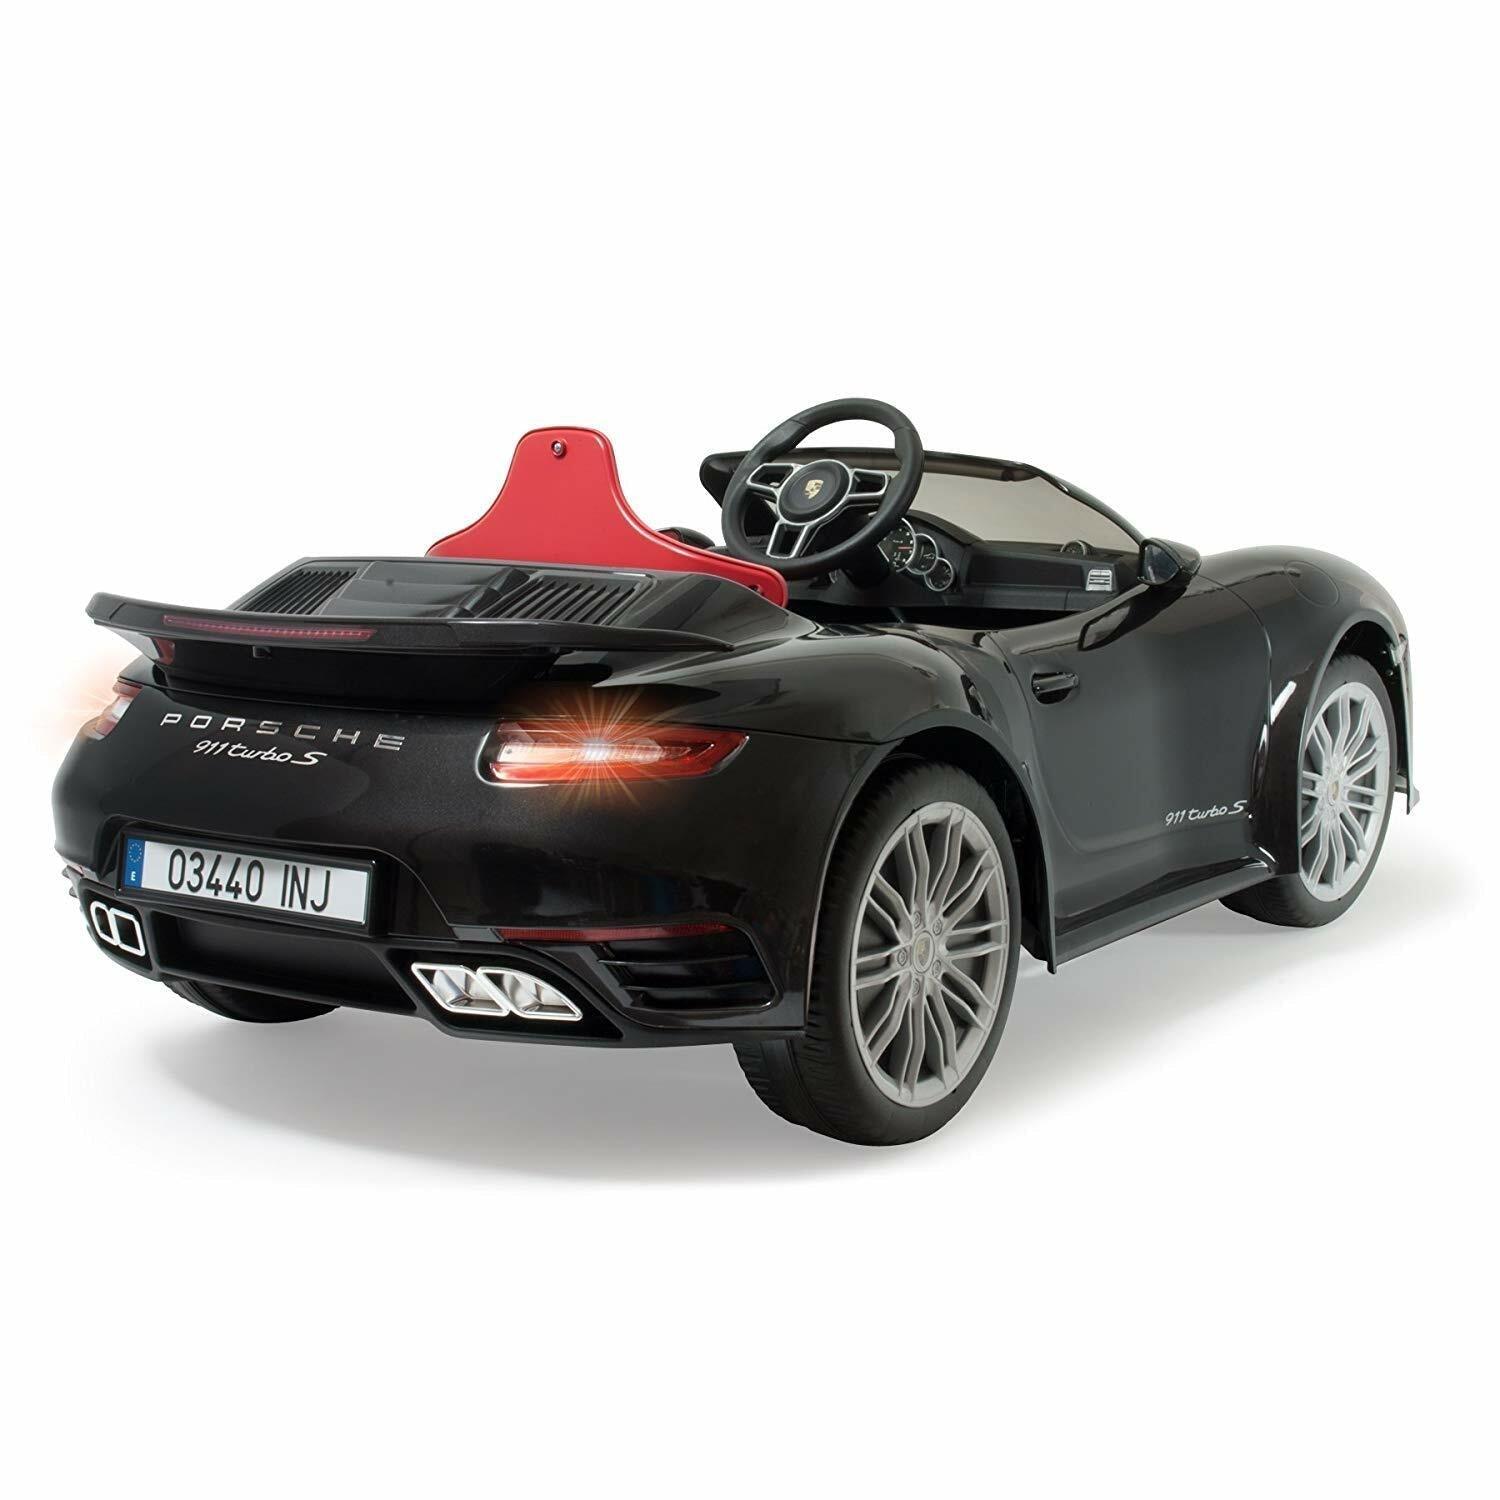 PATOYS | Injusa | Official Licensed Porsche12V Car for Kids 911 Turbo S Special Black Edition Ride on Car Injusa